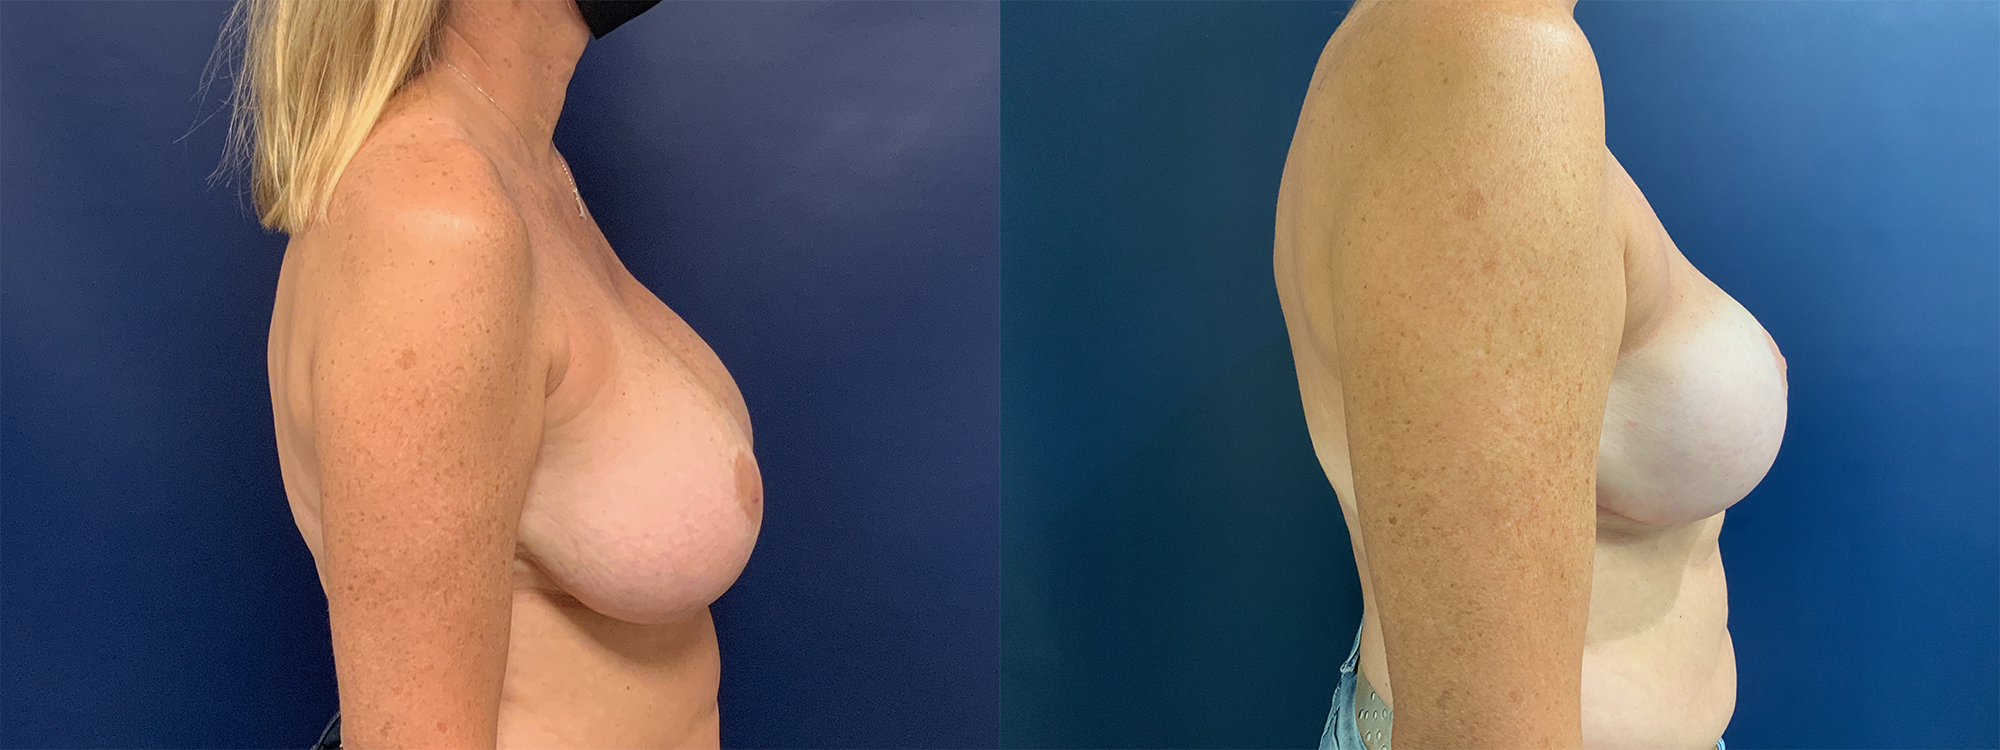 Breast Implant Removal Before and After Photo by Dr. Leveque of Gulf Coast Plastic Surgery in Pensacola, FL